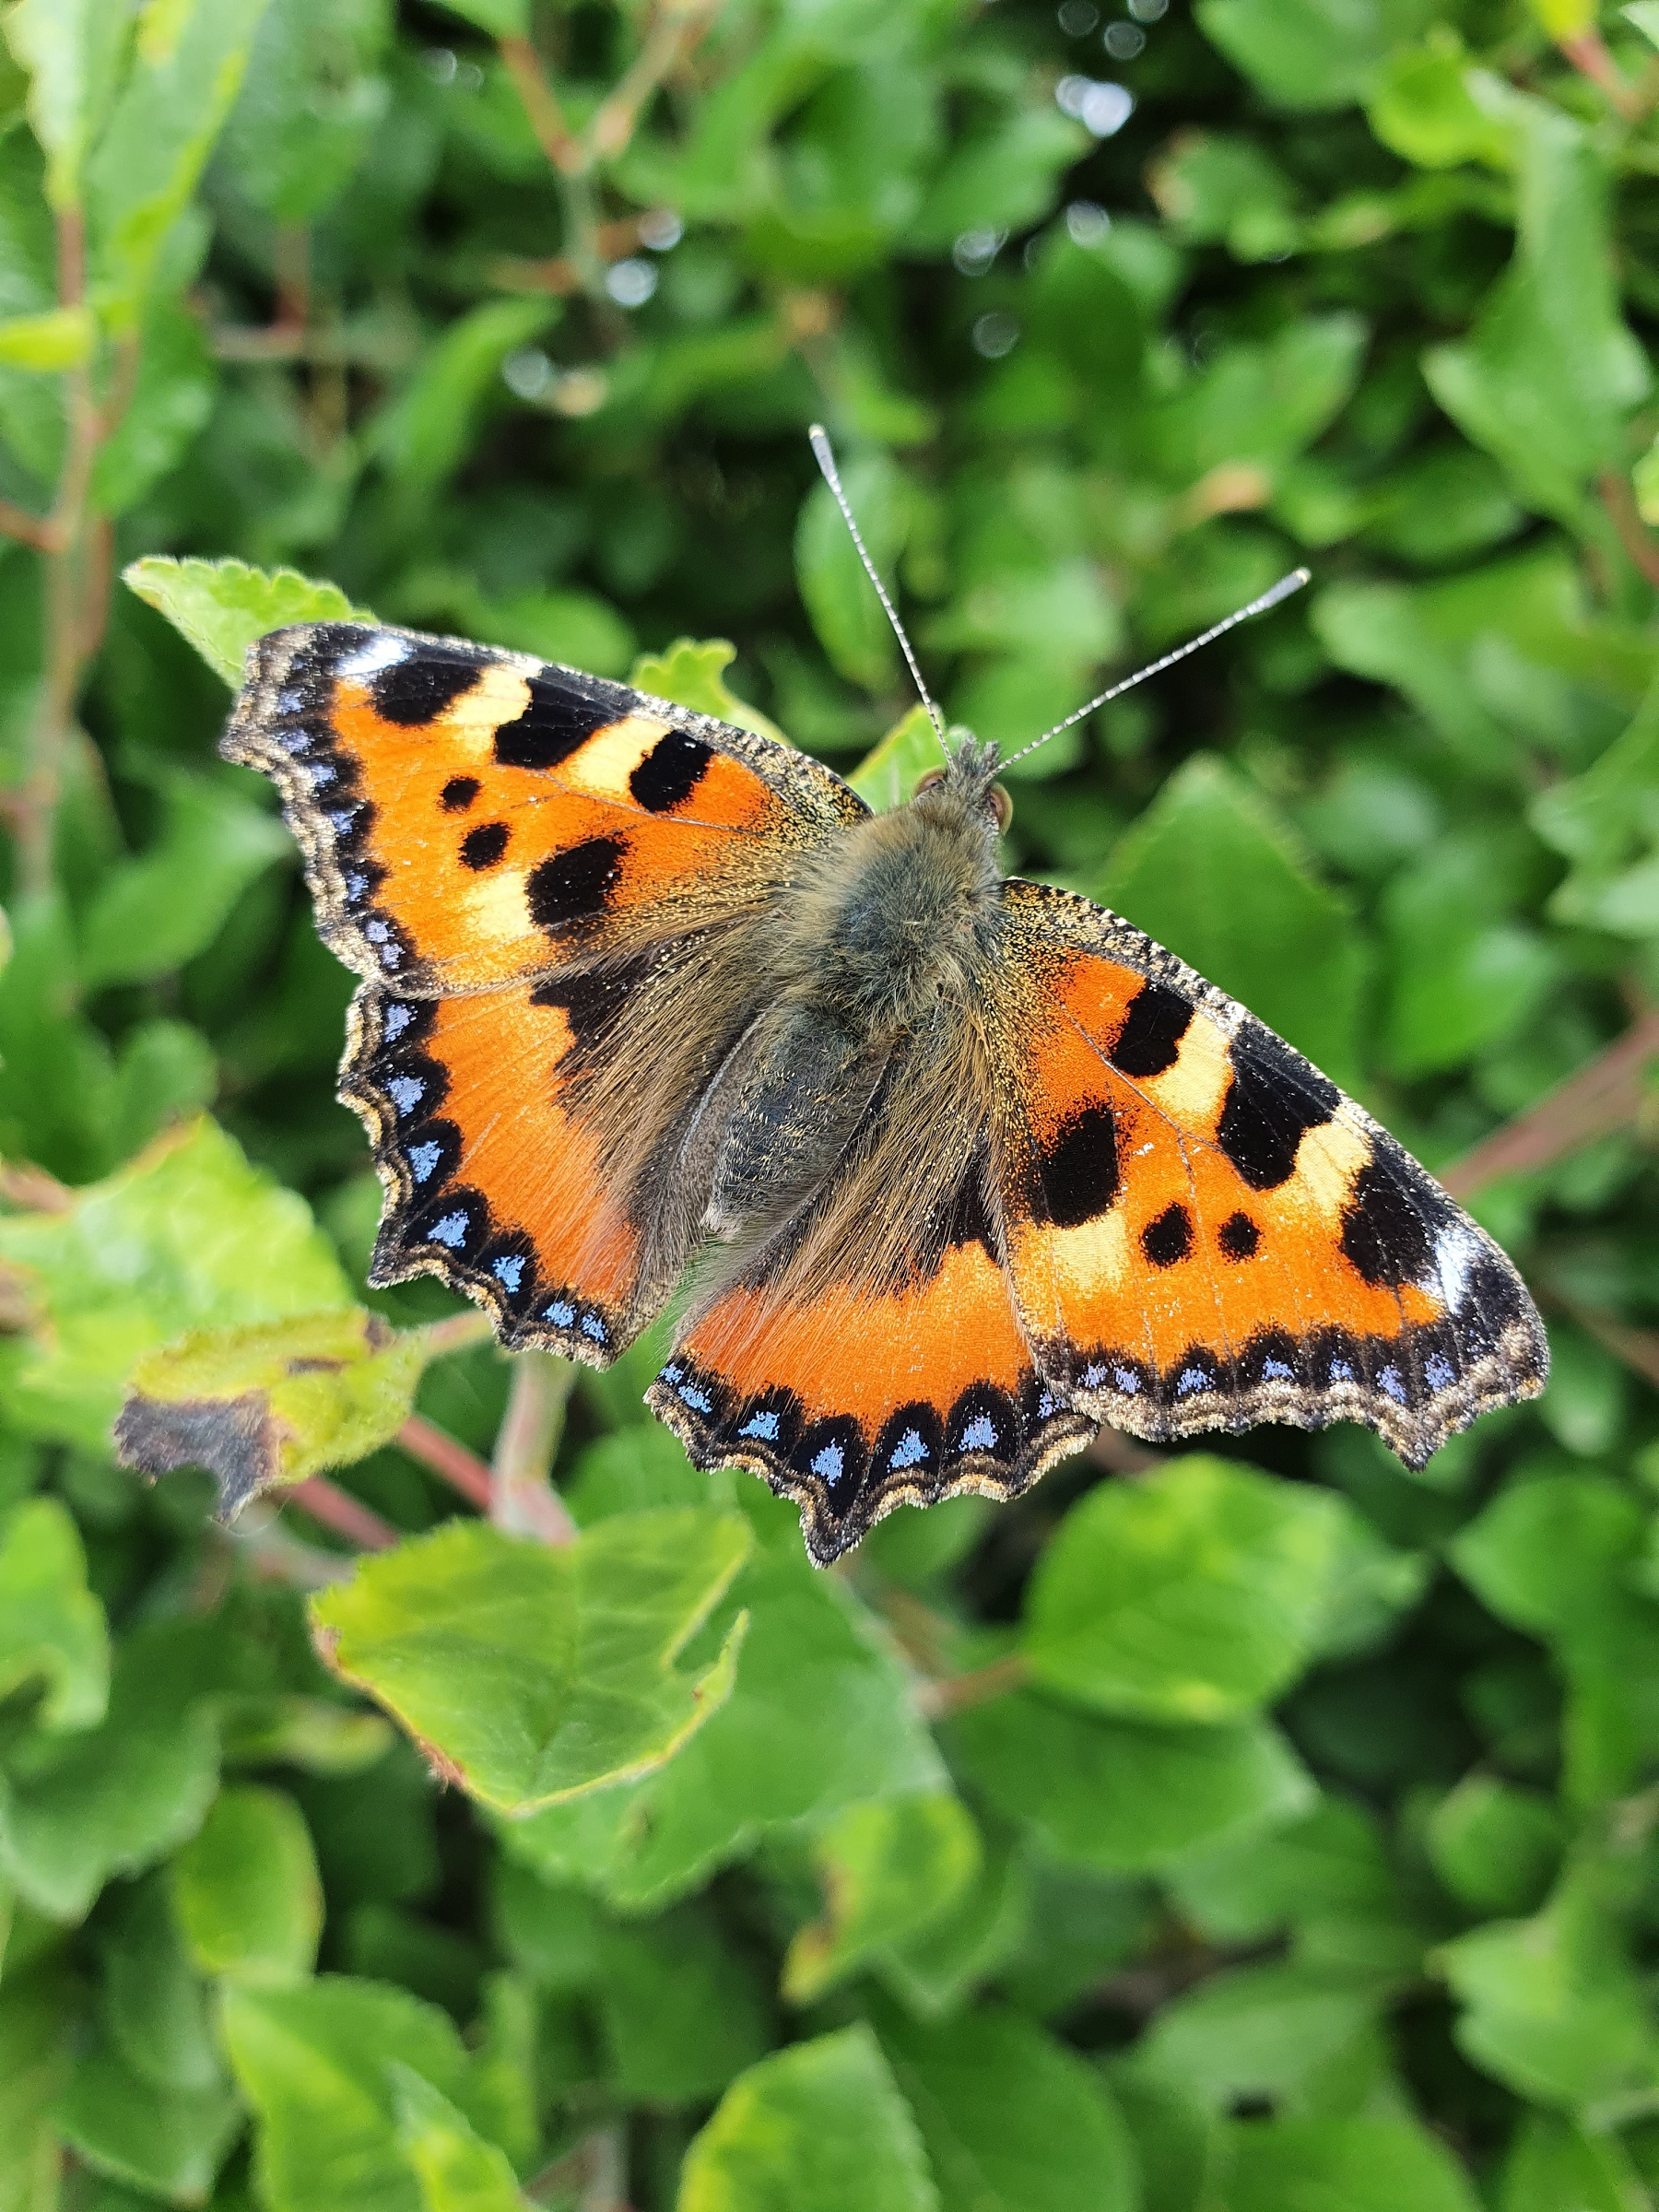 The beautiful and colourful Small Tortoiseshell Butterfly